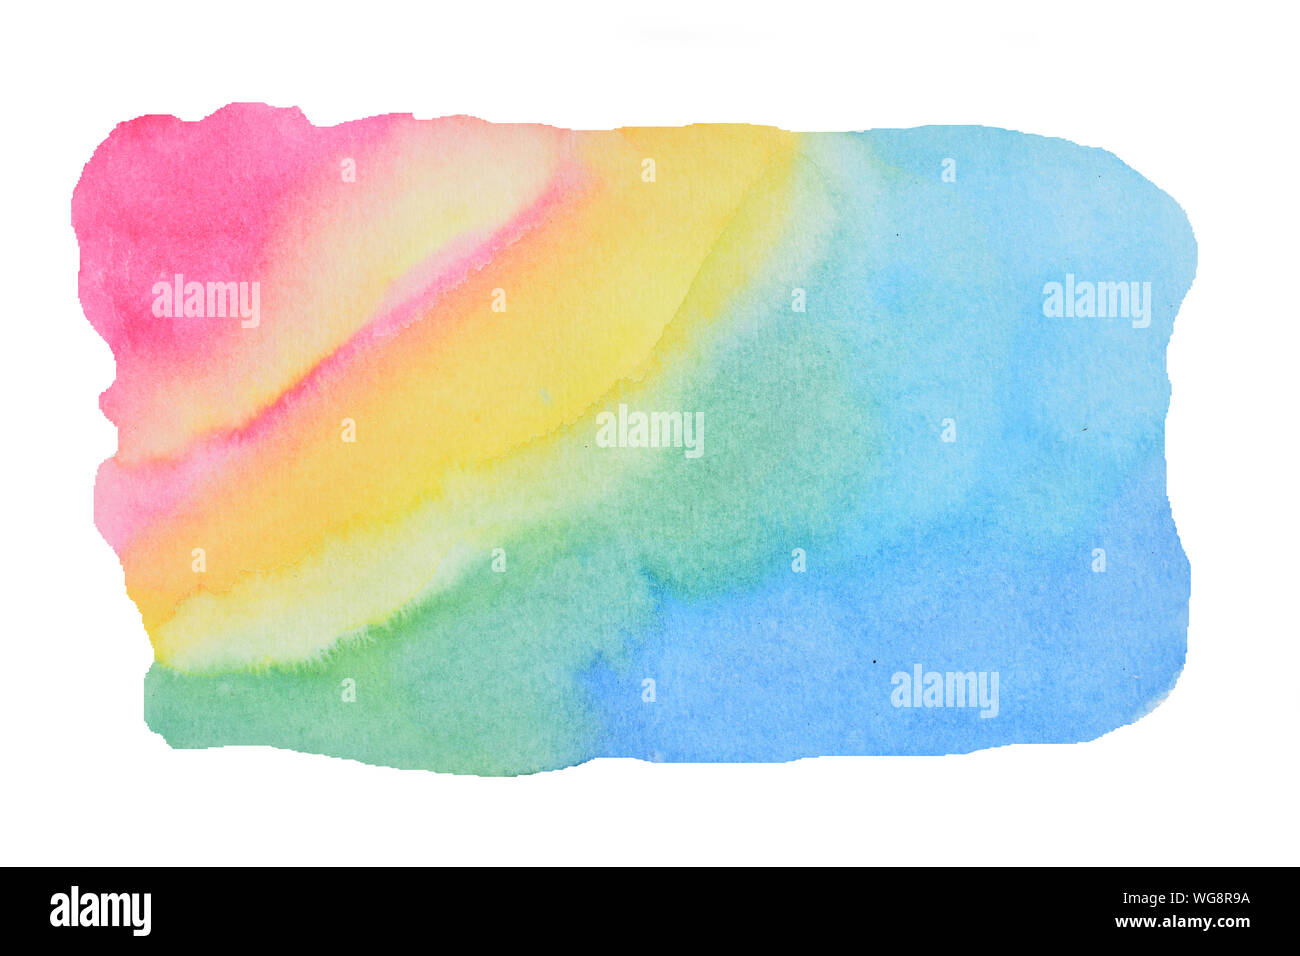 Colorful pattern on white background , Illustration abstract watercolor hand draw and painted on paper Stock Photo